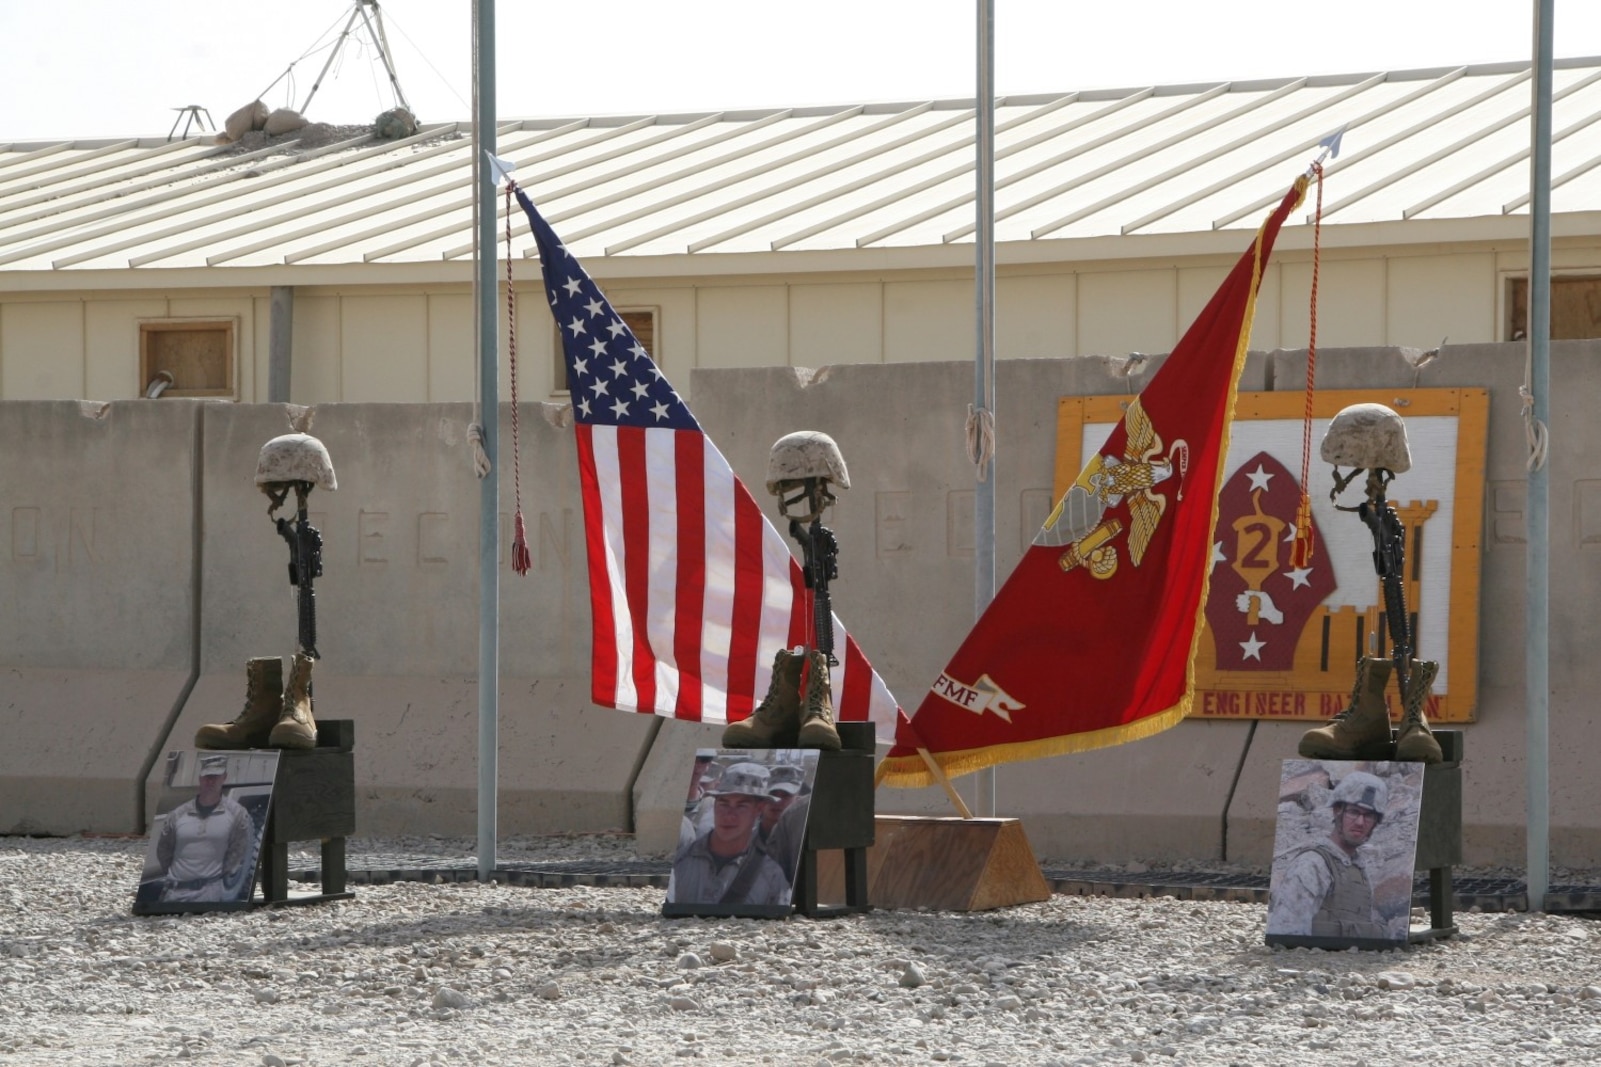 Three battlefield crosses stand in honor of three fallen Marines during a memorial ceremony aboard Camp Leatherneck, Afghanistan, July 8, 2014. The service was held to honor, from left to right, Staff Sgt. David H. Stewart, a combat engineer, platoon sergeant and native of Stafford, Virginia; Cpl. Brandon J. Garabrant, a combat engineer and native of Peterborough, New Hampshire; and Cpl. Adam F. Wolff, a combat engineer and native of Cedar Rapids, Iowa, all Marines serving with 3rd Platoon, Route Clearance Company, 2nd Combat Engineer Battalion, who gave the ultimate sacrifice while conducting combat operations in Helmand province, Afghanistan, June 20, 2014.